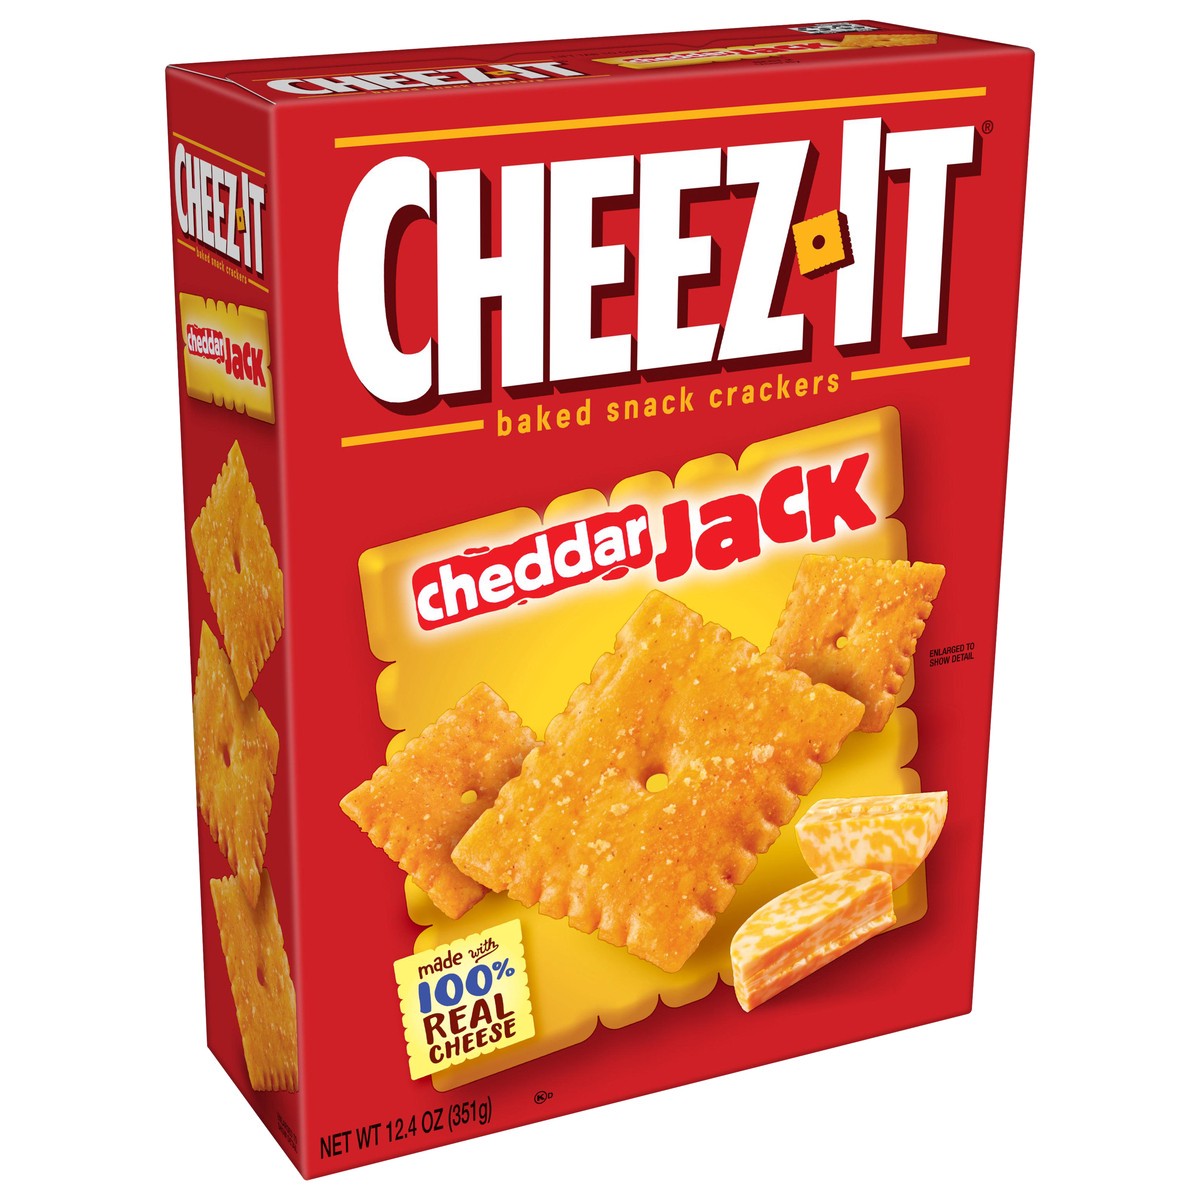 slide 2 of 8, Cheez-It Cheese Crackers, Cheddar Jack, 12.4 oz, 12.4 oz